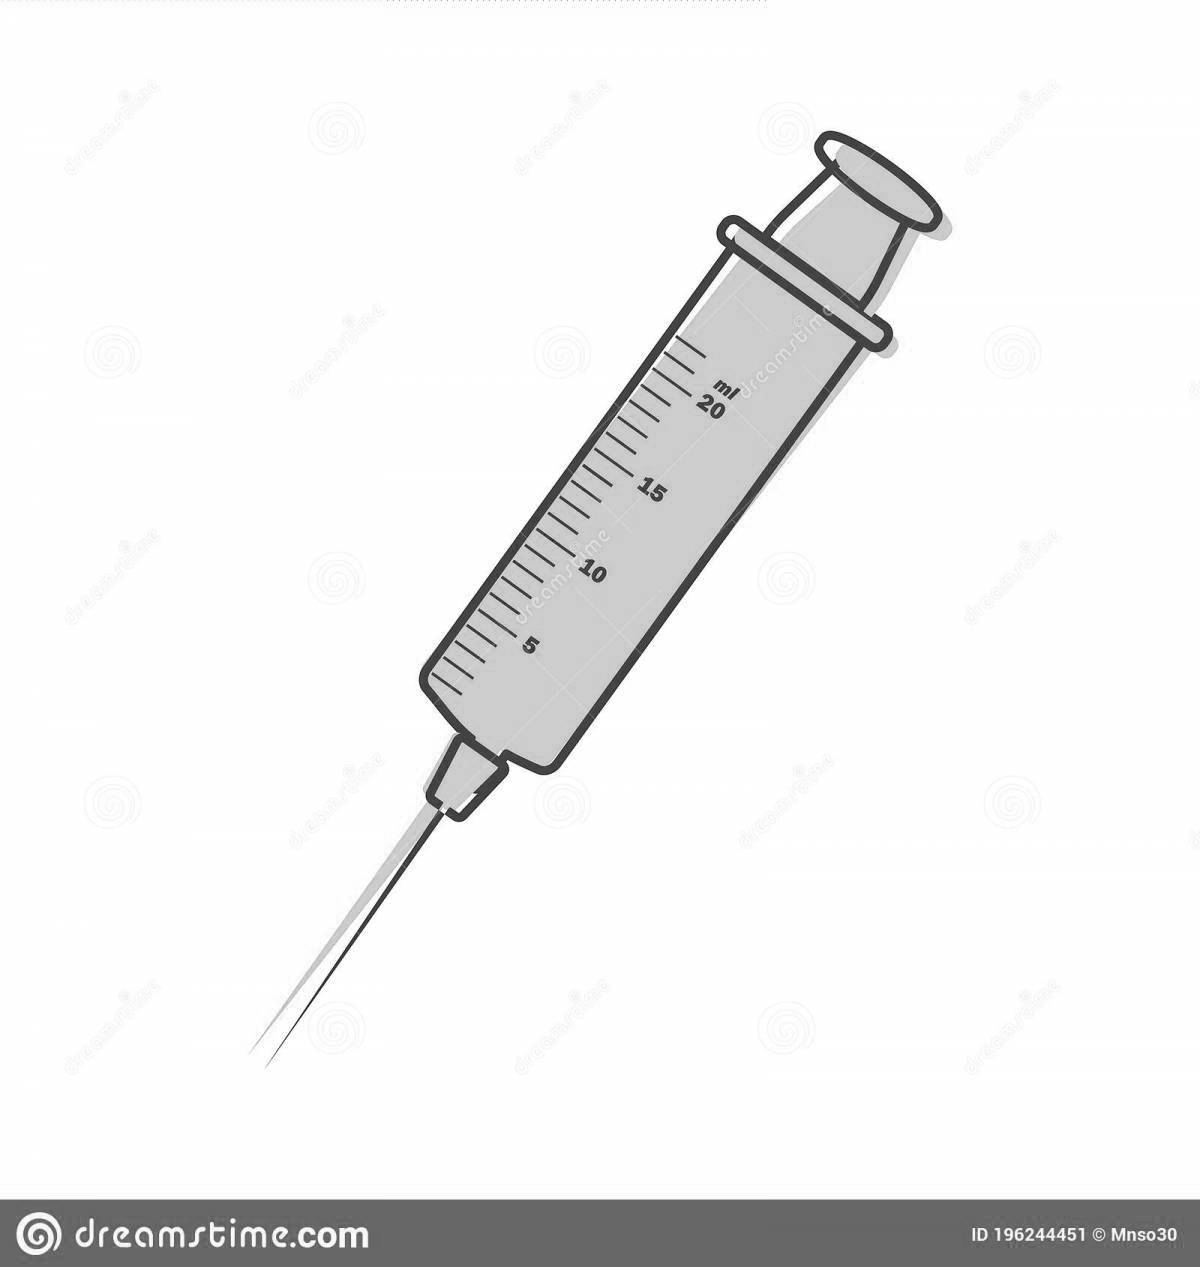 Colouring funny syringe with a needle